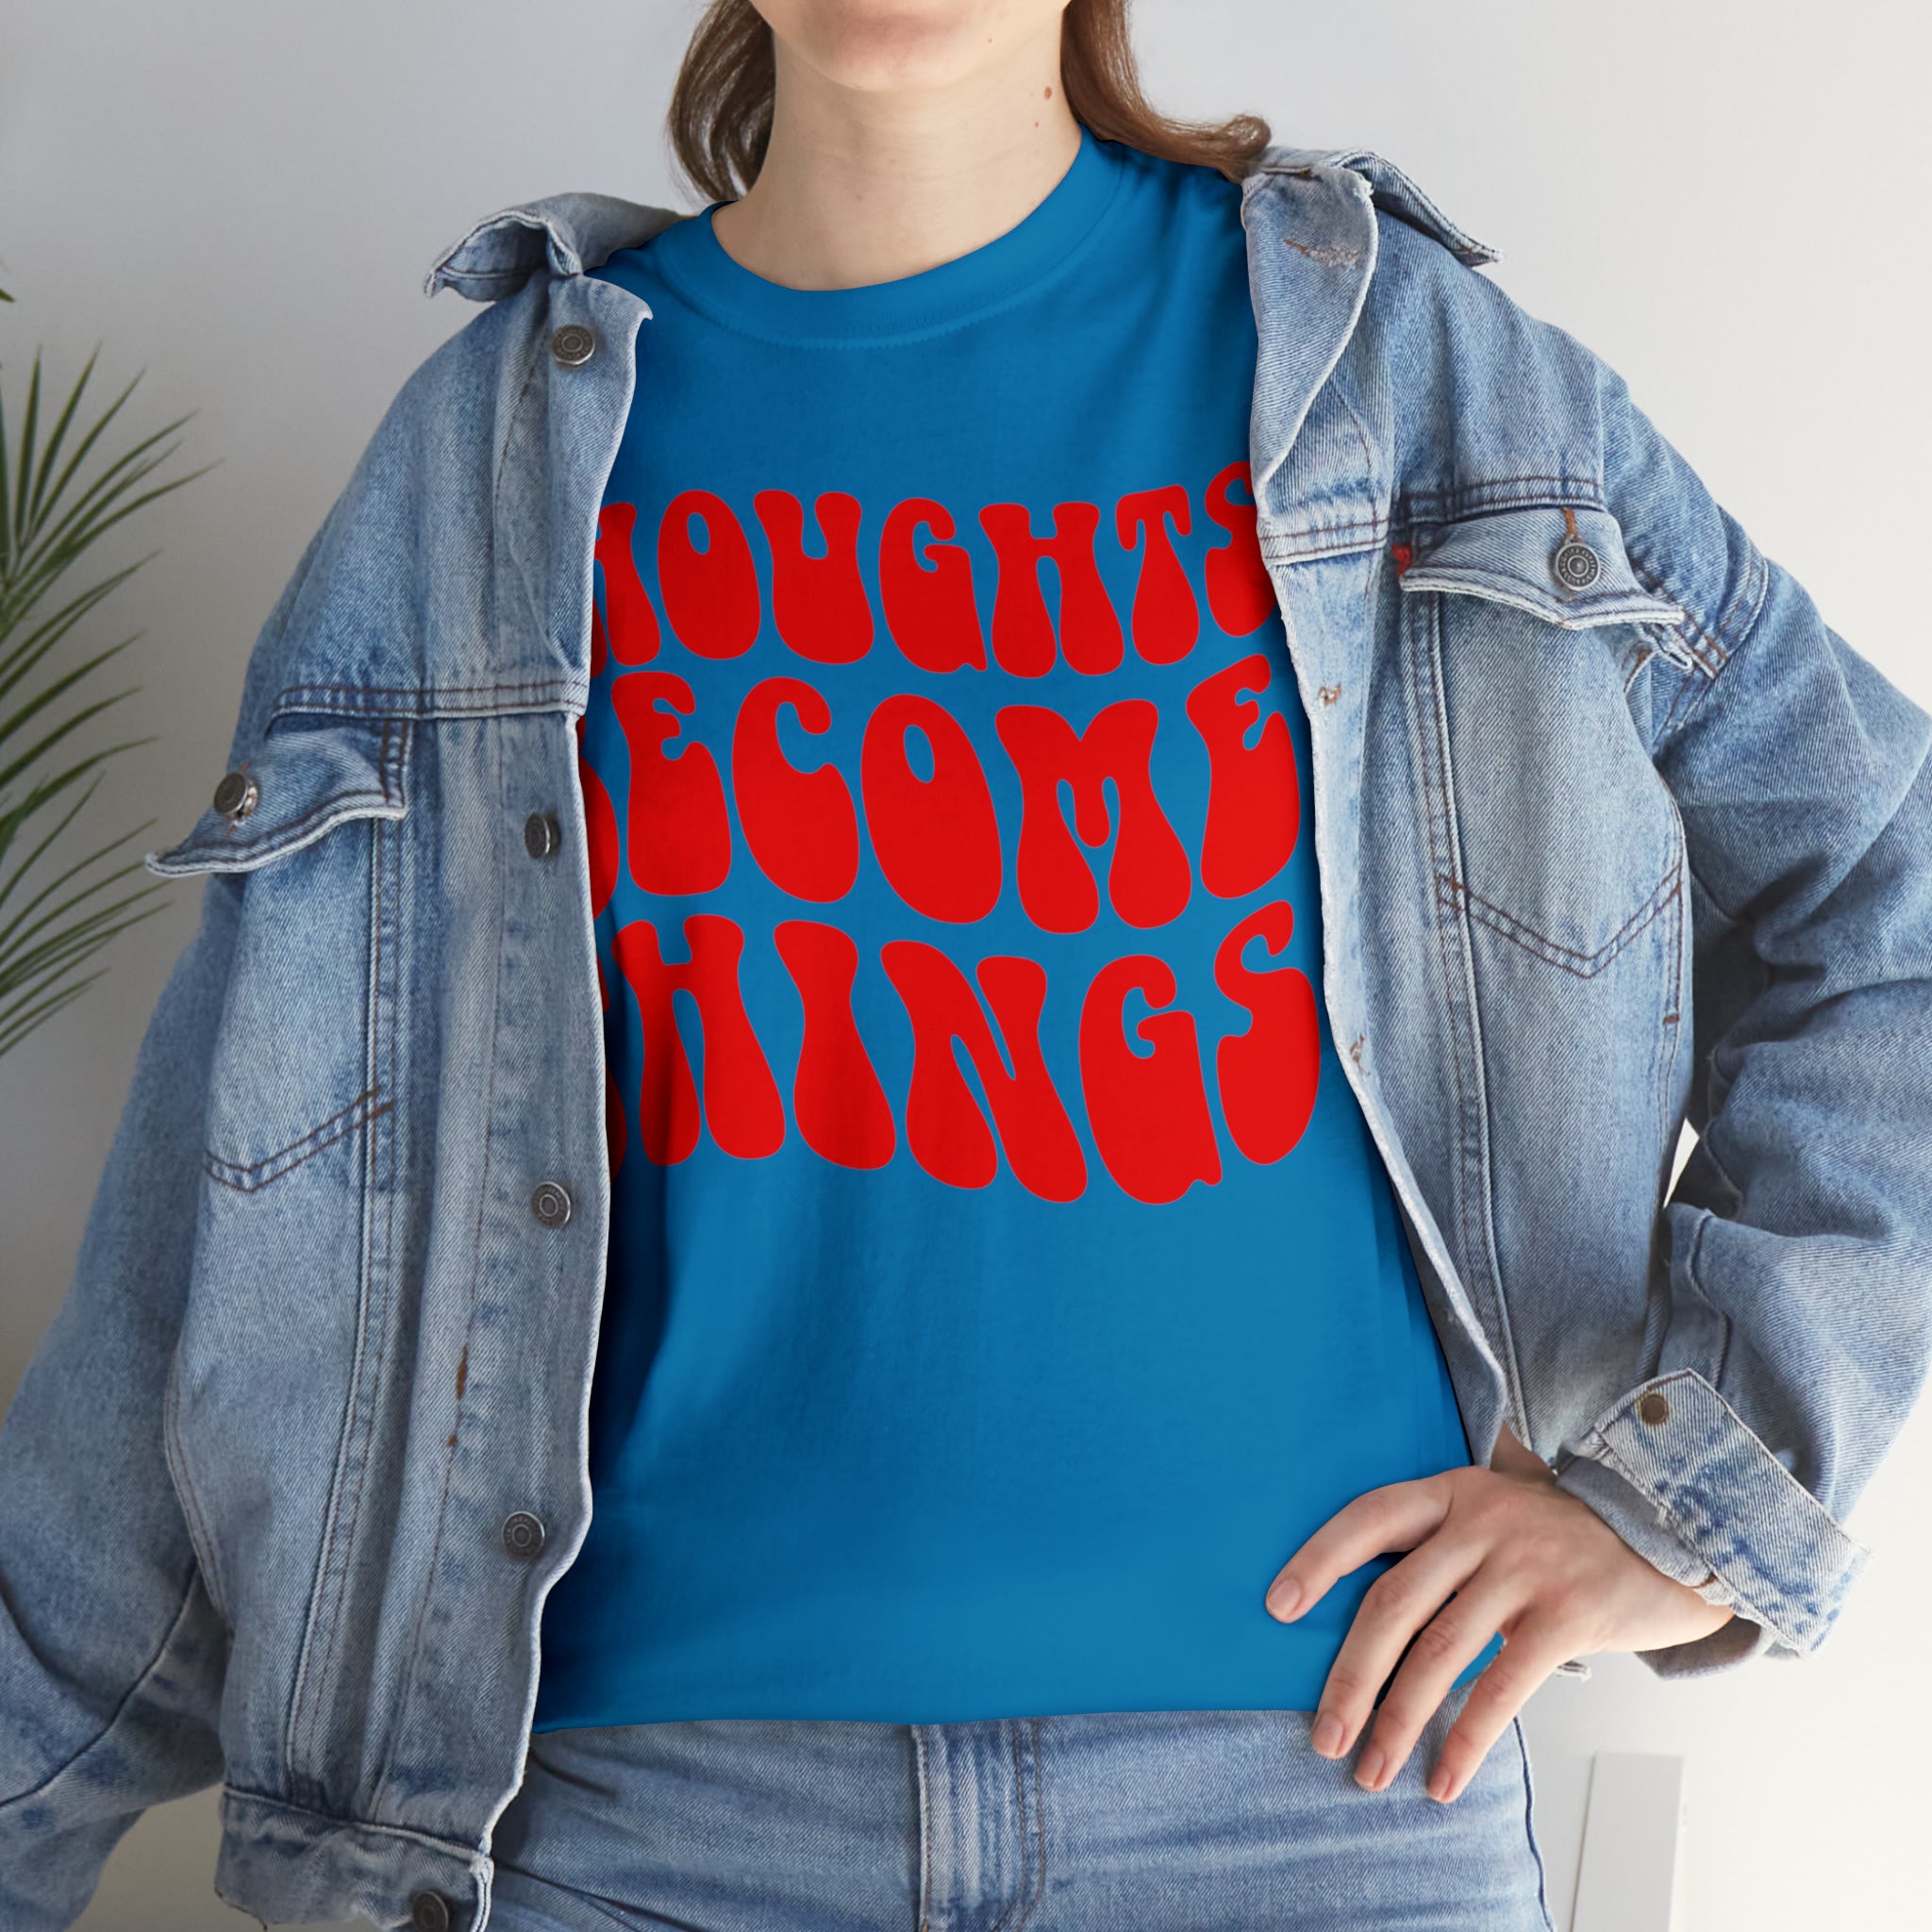 Thoughts Become Things T-Shirt Designed by Big Brain Brew